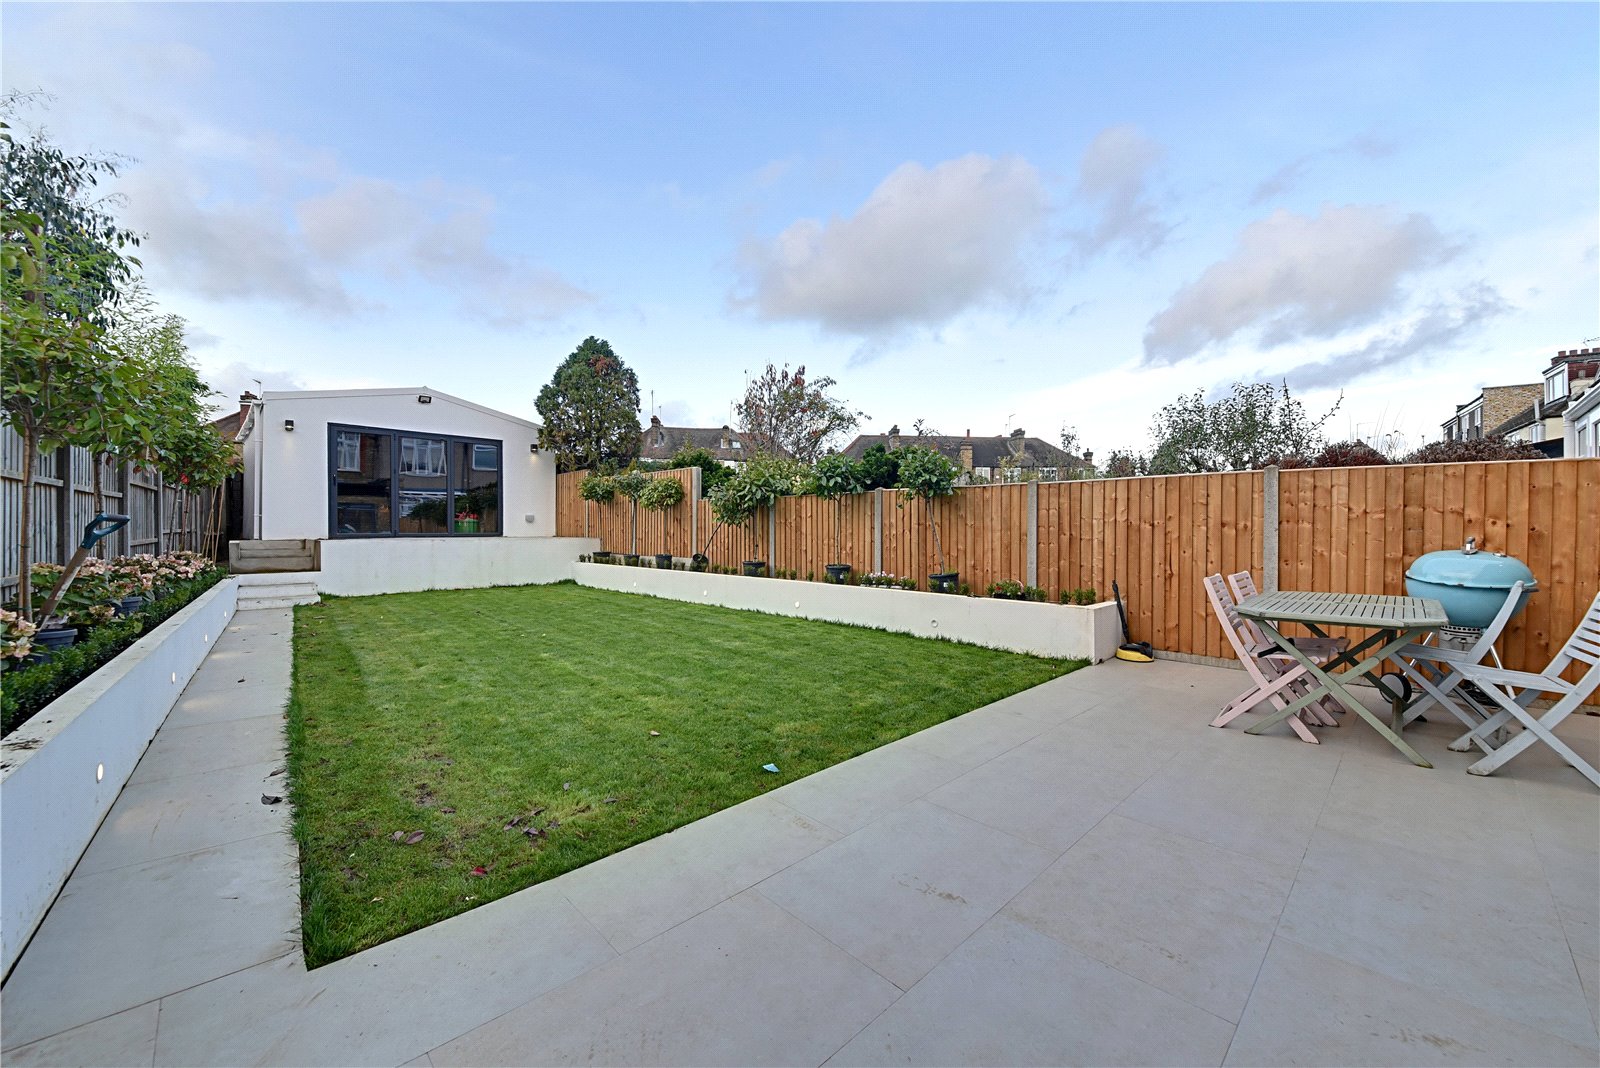 4 bed house for sale in Brunswick Grove, Friern Barnet  - Property Image 4